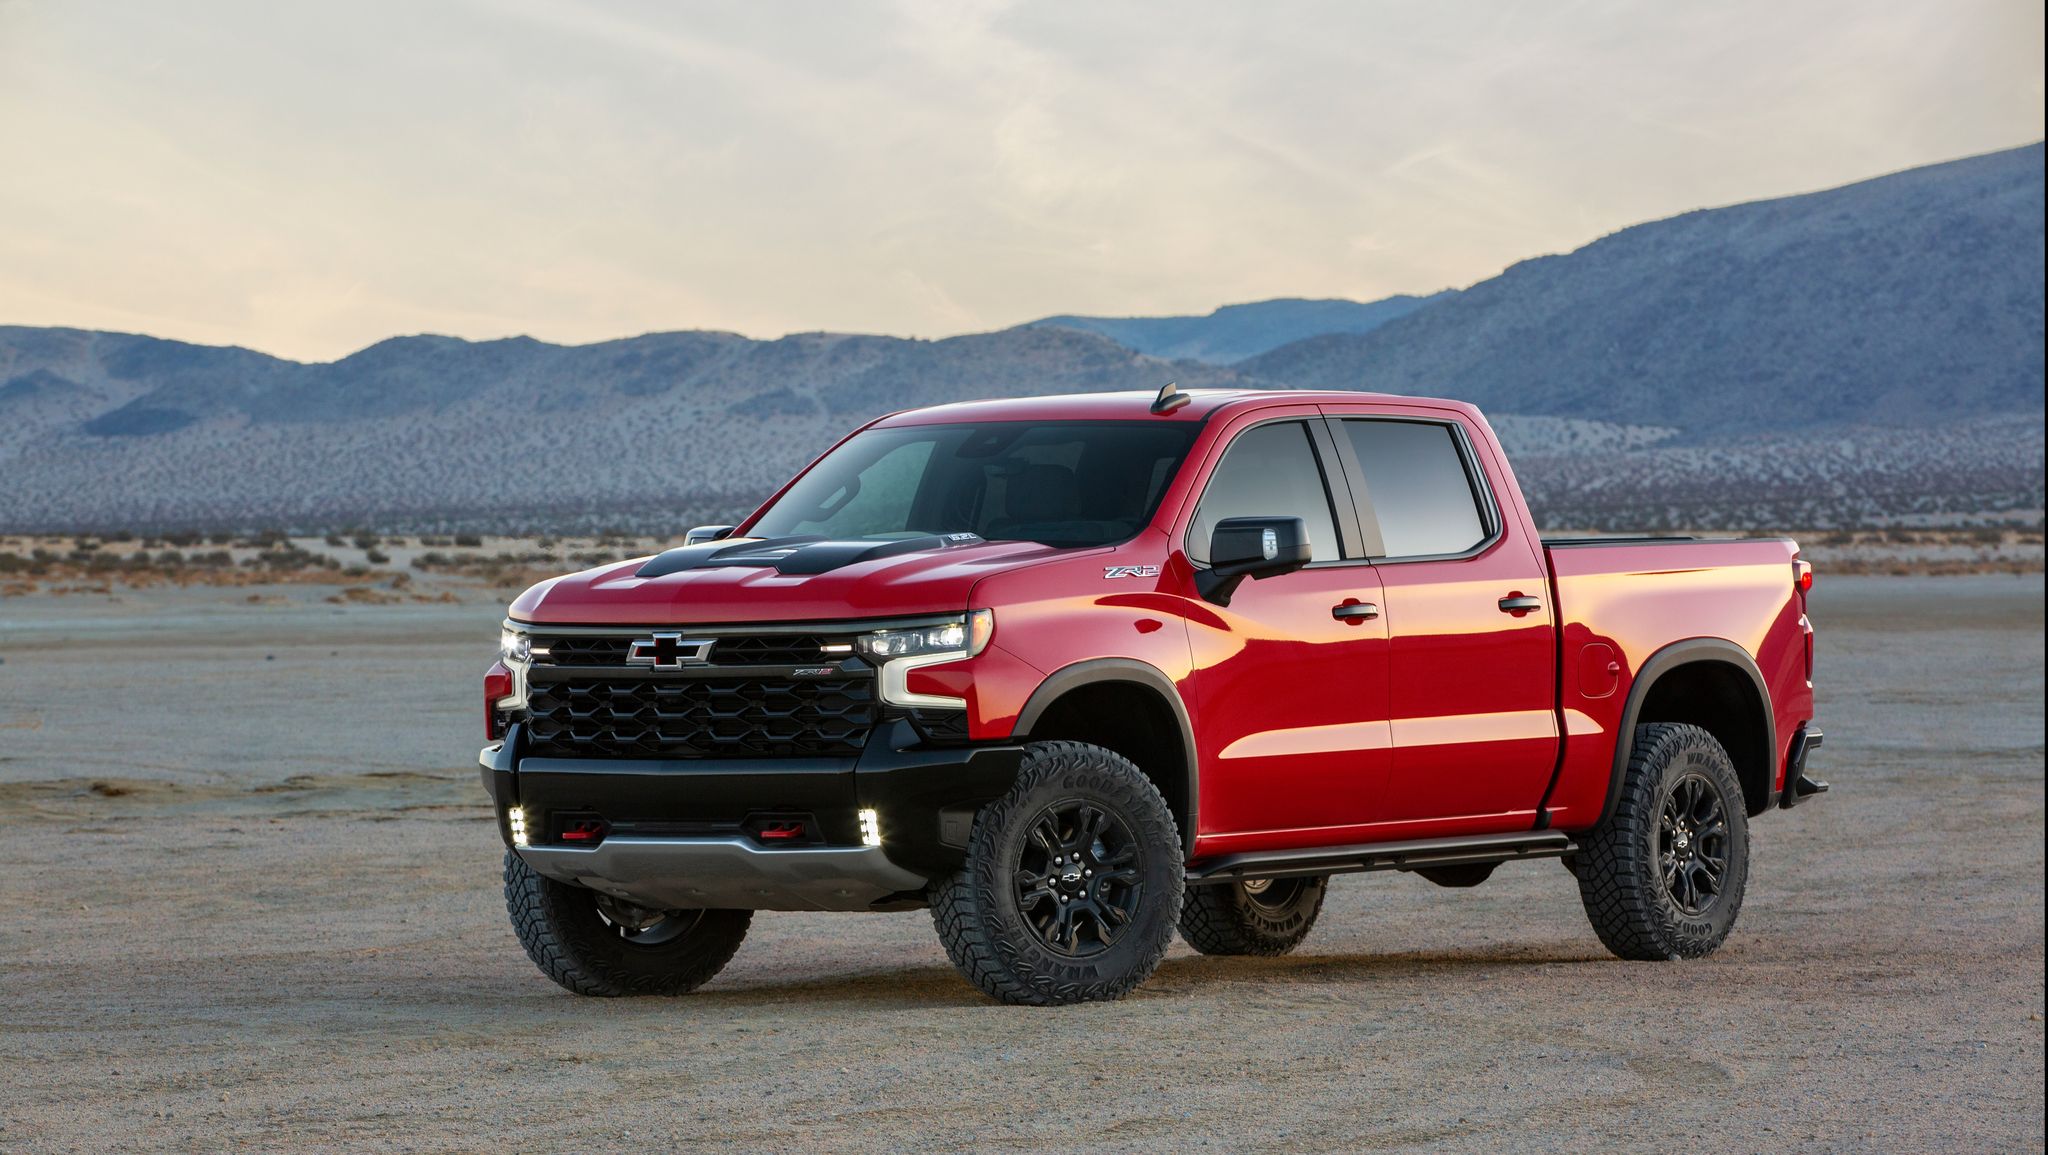 Is the 2022 Chevy Silverado 1500 the best pickup truck?